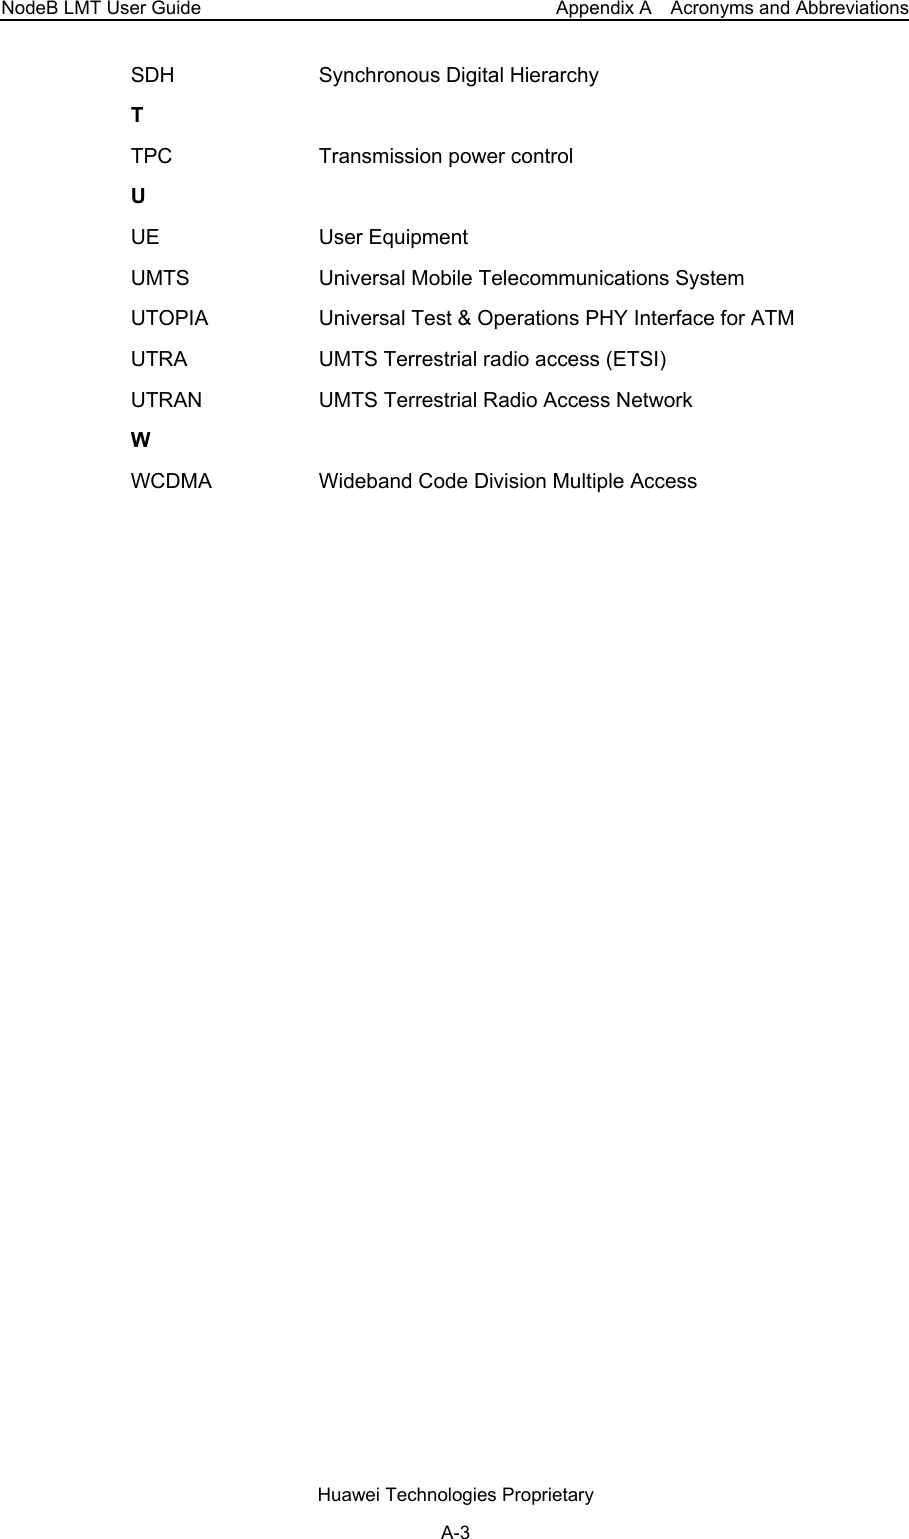 NodeB LMT User Guide  Appendix A    Acronyms and Abbreviations SDH Synchronous Digital Hierarchy T TPC  Transmission power control U UE User Equipment UMTS  Universal Mobile Telecommunications System UTOPIA  Universal Test &amp; Operations PHY Interface for ATM UTRA  UMTS Terrestrial radio access (ETSI) UTRAN  UMTS Terrestrial Radio Access Network W WCDMA  Wideband Code Division Multiple Access  Huawei Technologies Proprietary A-3 